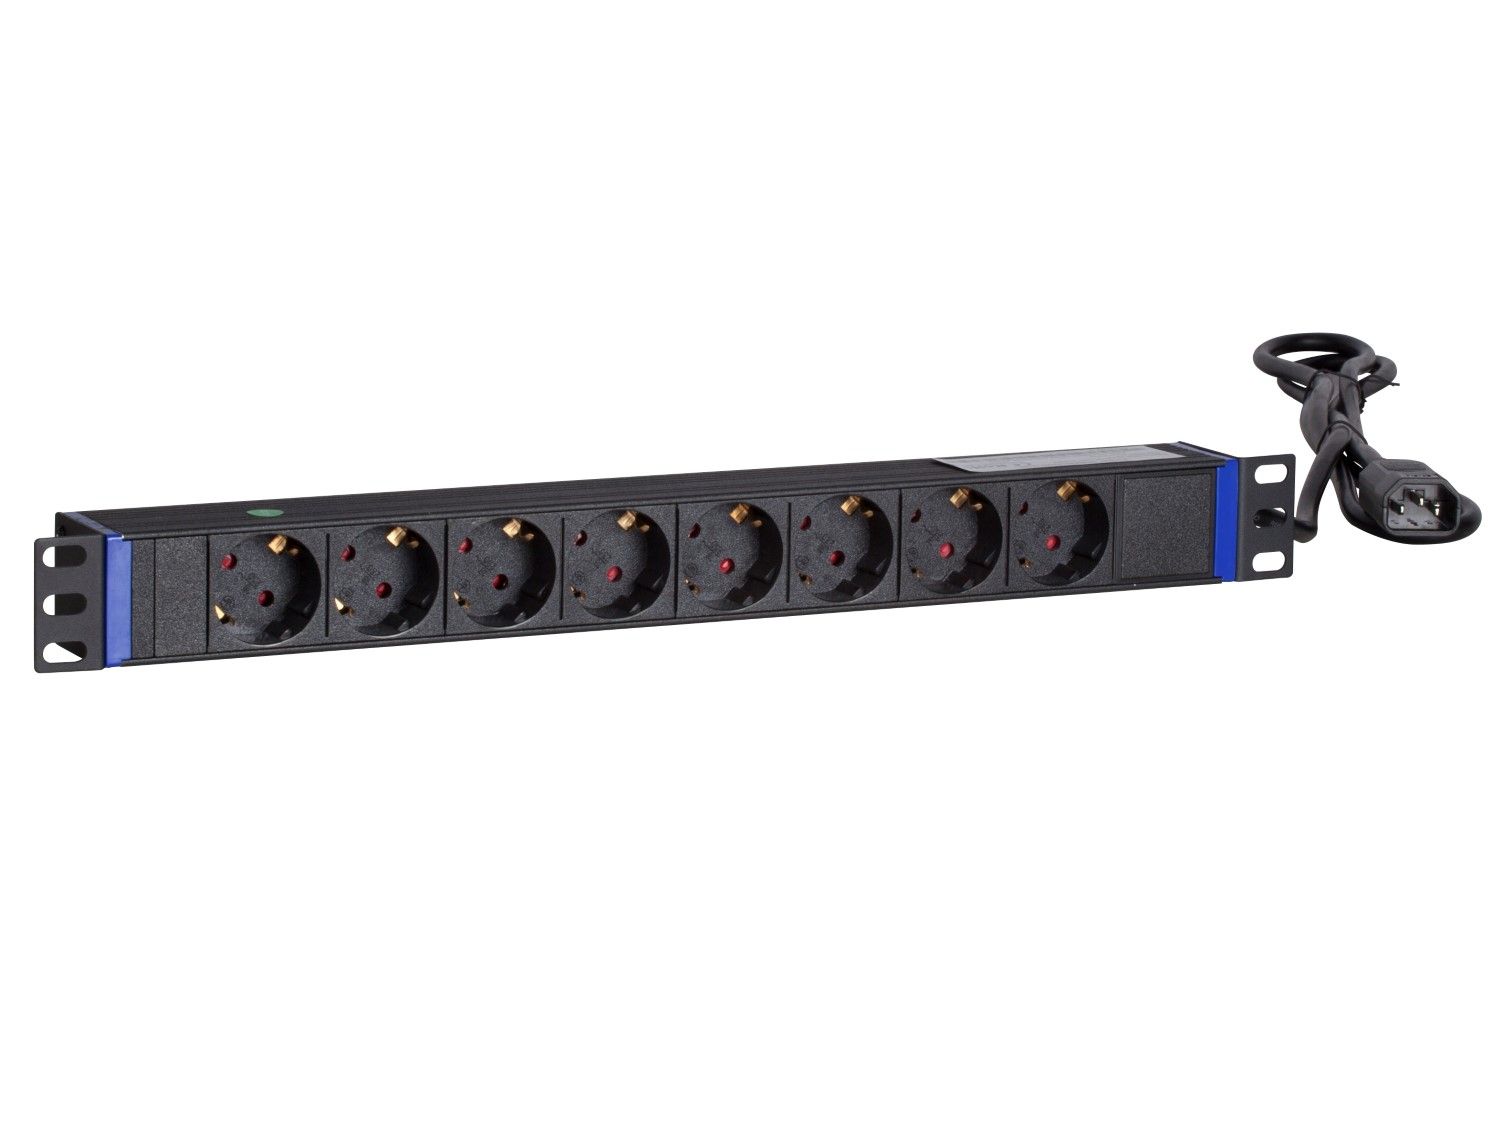 19-inch Rack-mount Power Strip with Overload Protection 